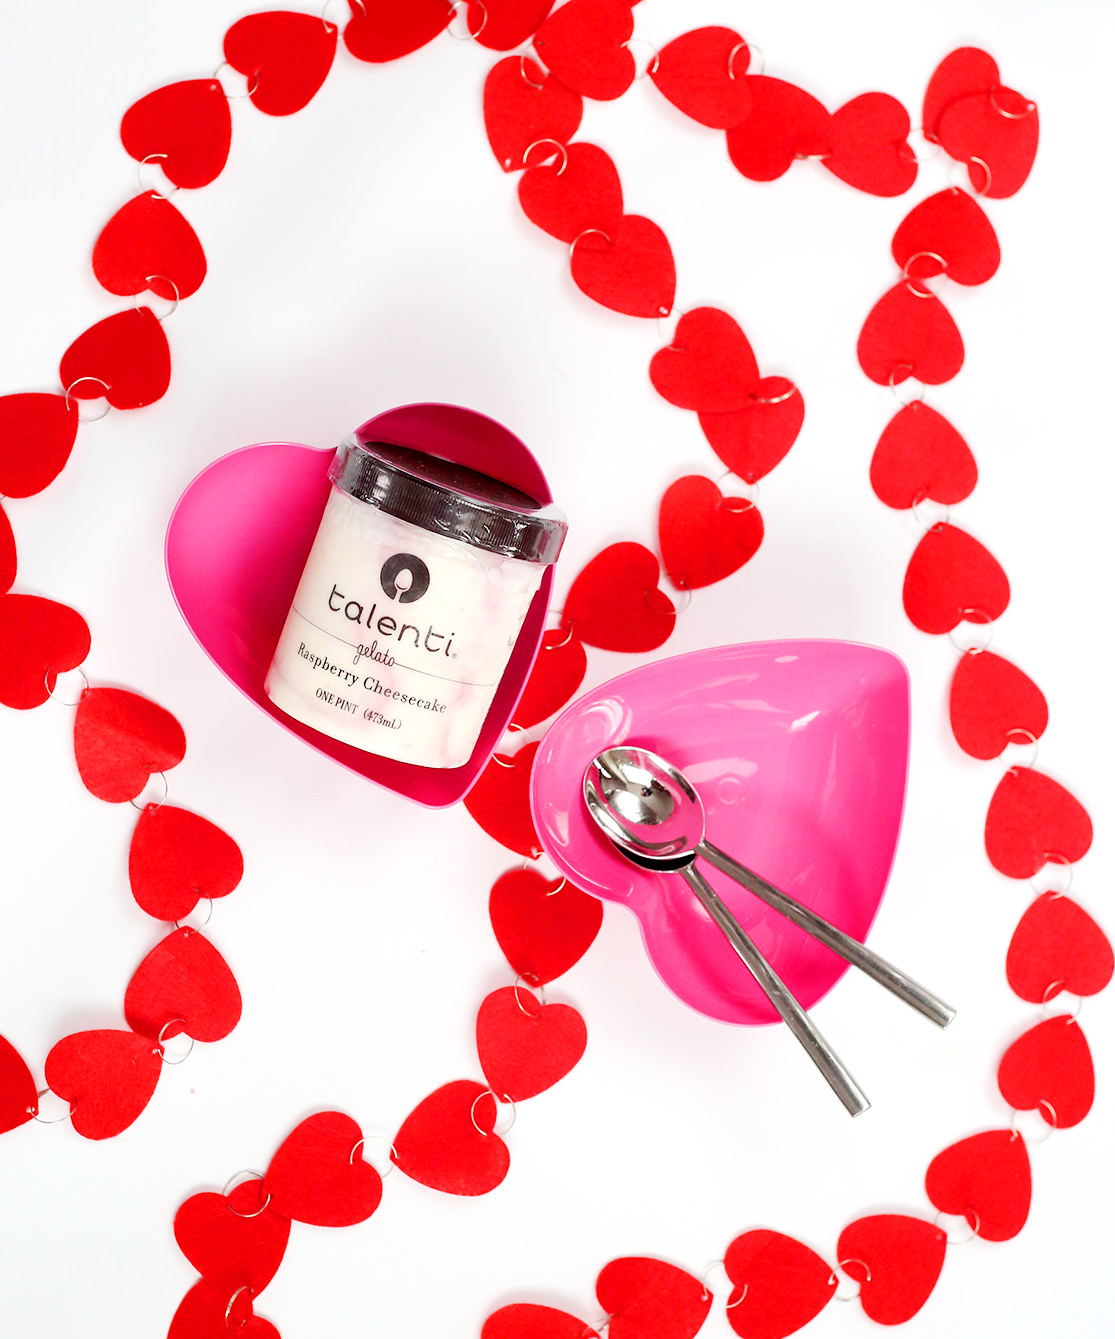 Fun and festive gifts for your Galentines- all from the grocery store! Lily & Val Living